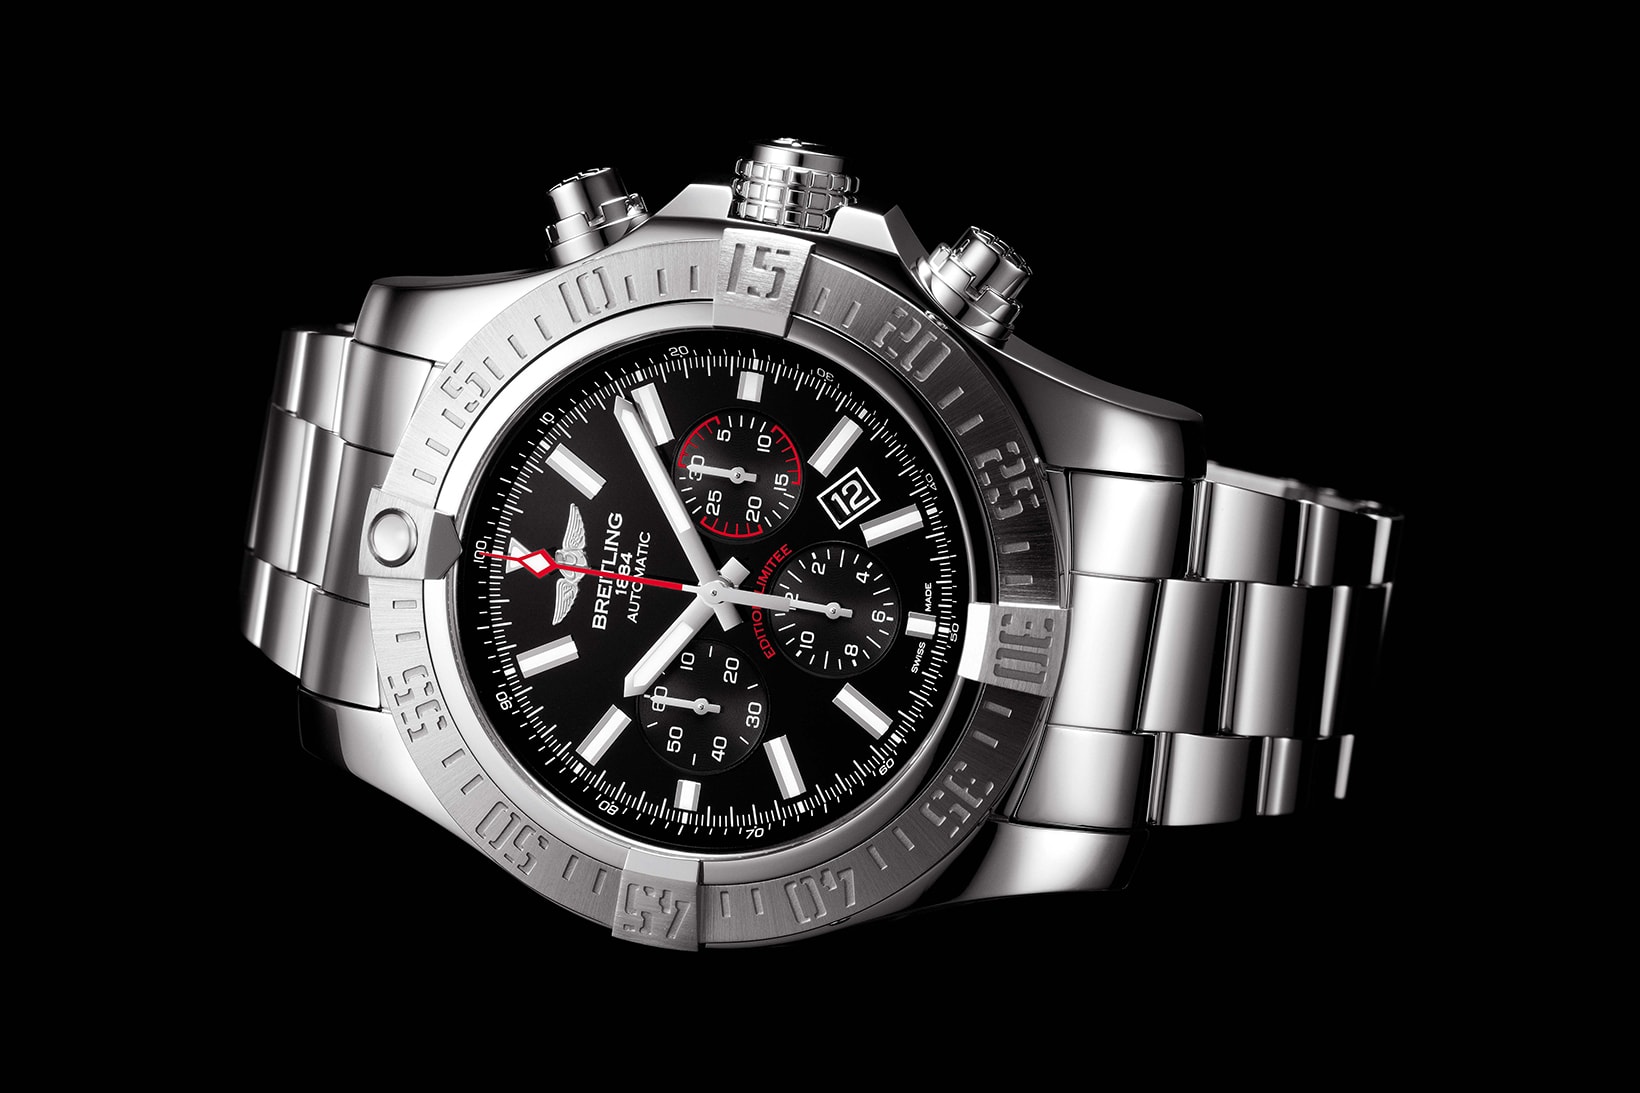 Breitling Super Avenger 01 Boutique Edition Chronograph Watch 2017 October Release